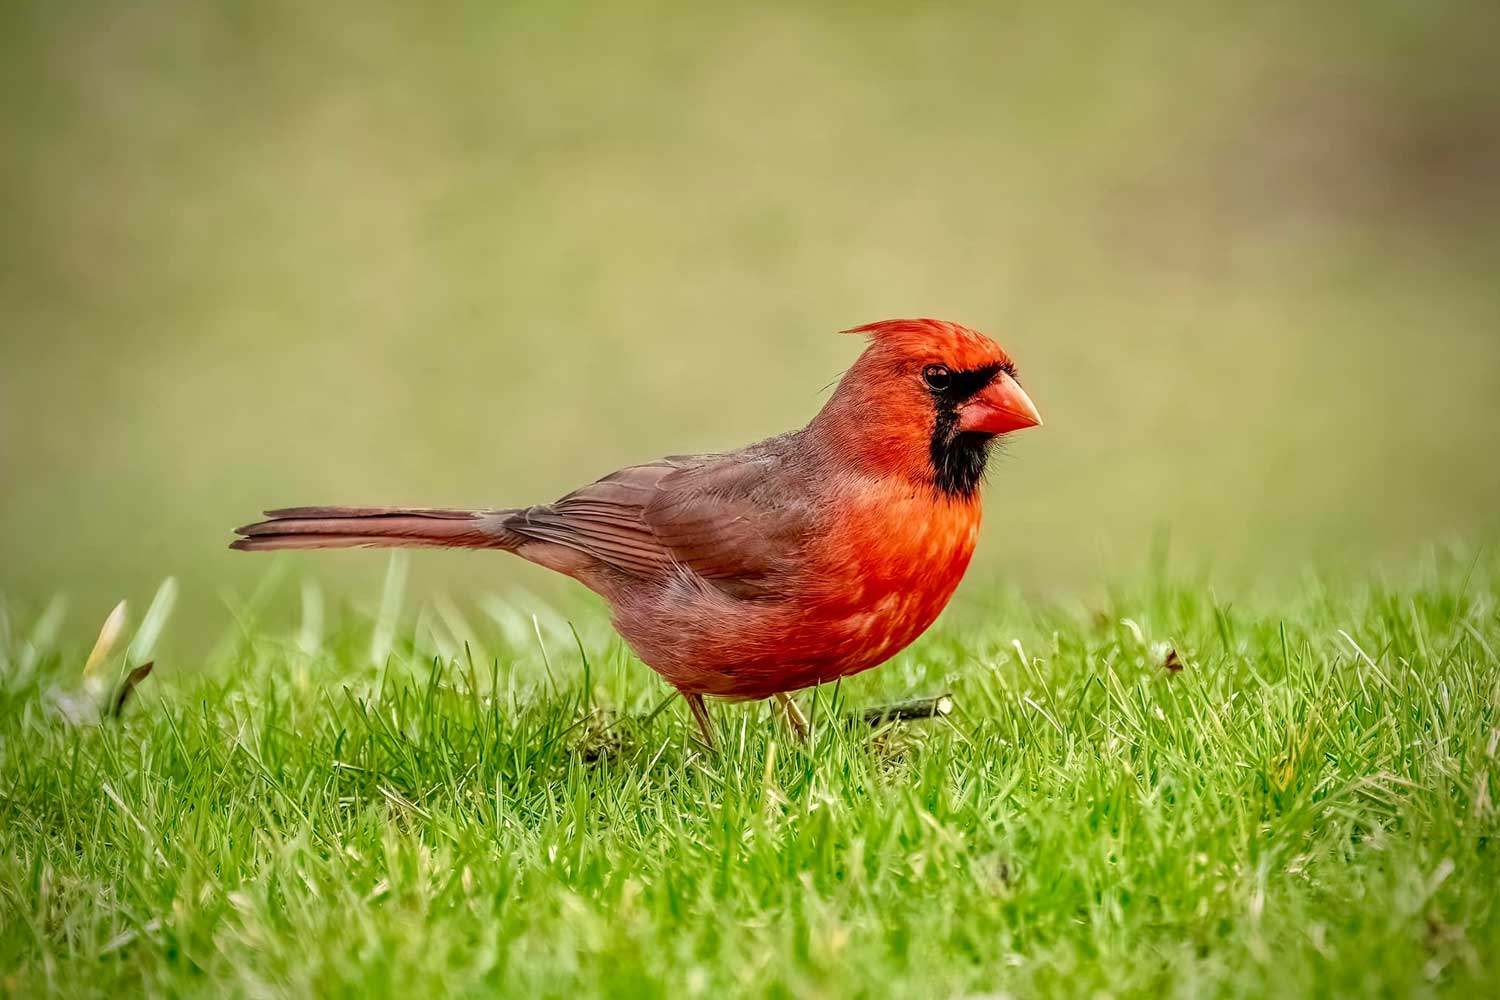 A male cardinal in the grass.